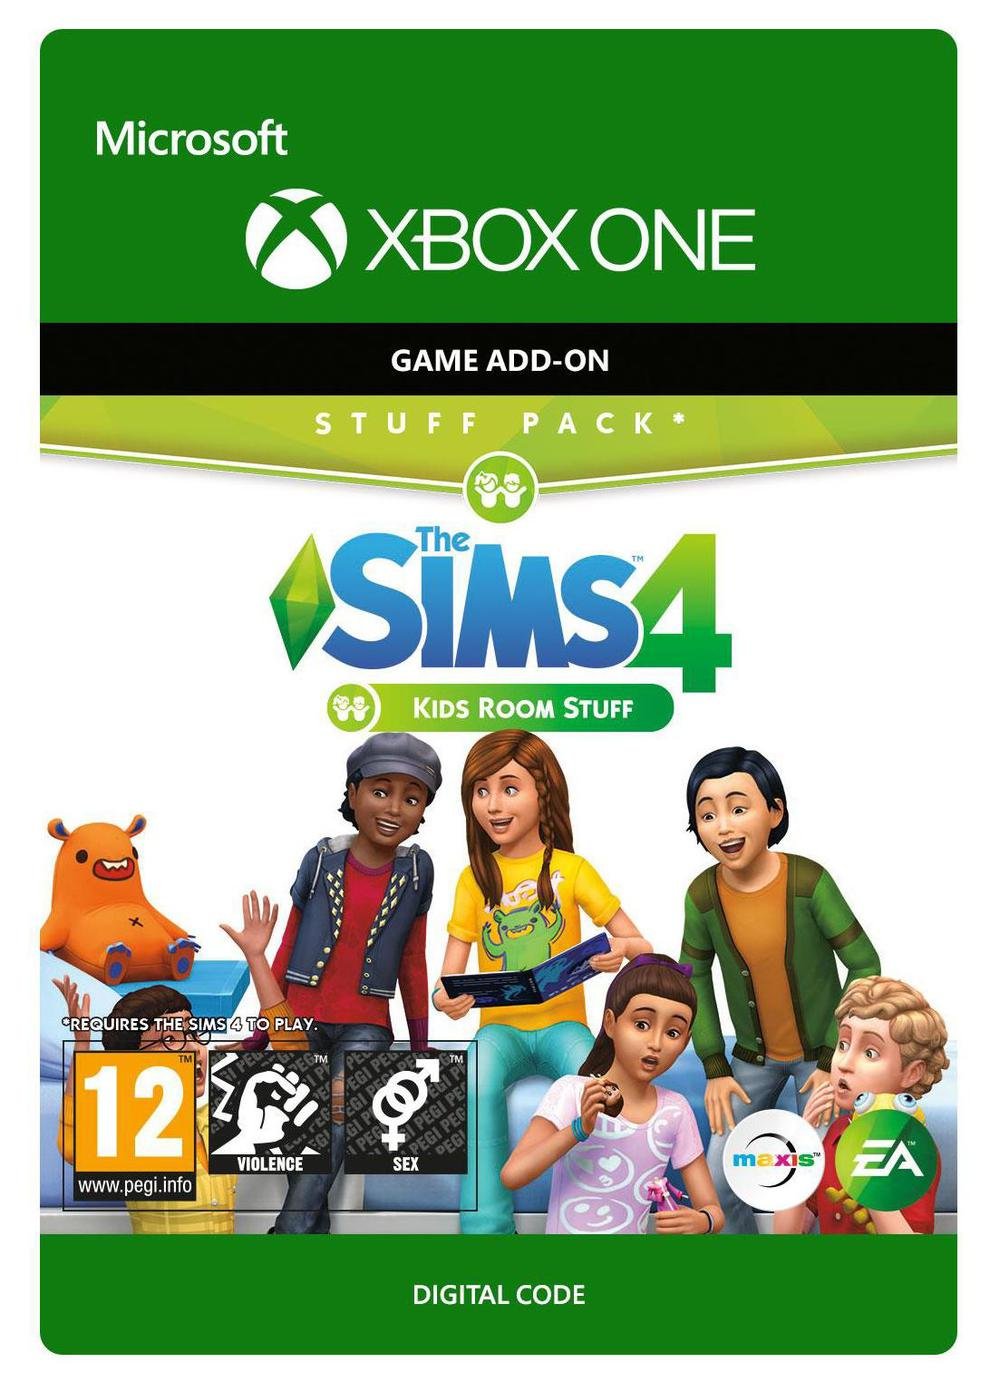 The Sims 4: Kids Room Stuff Xbox Game - Digital Download